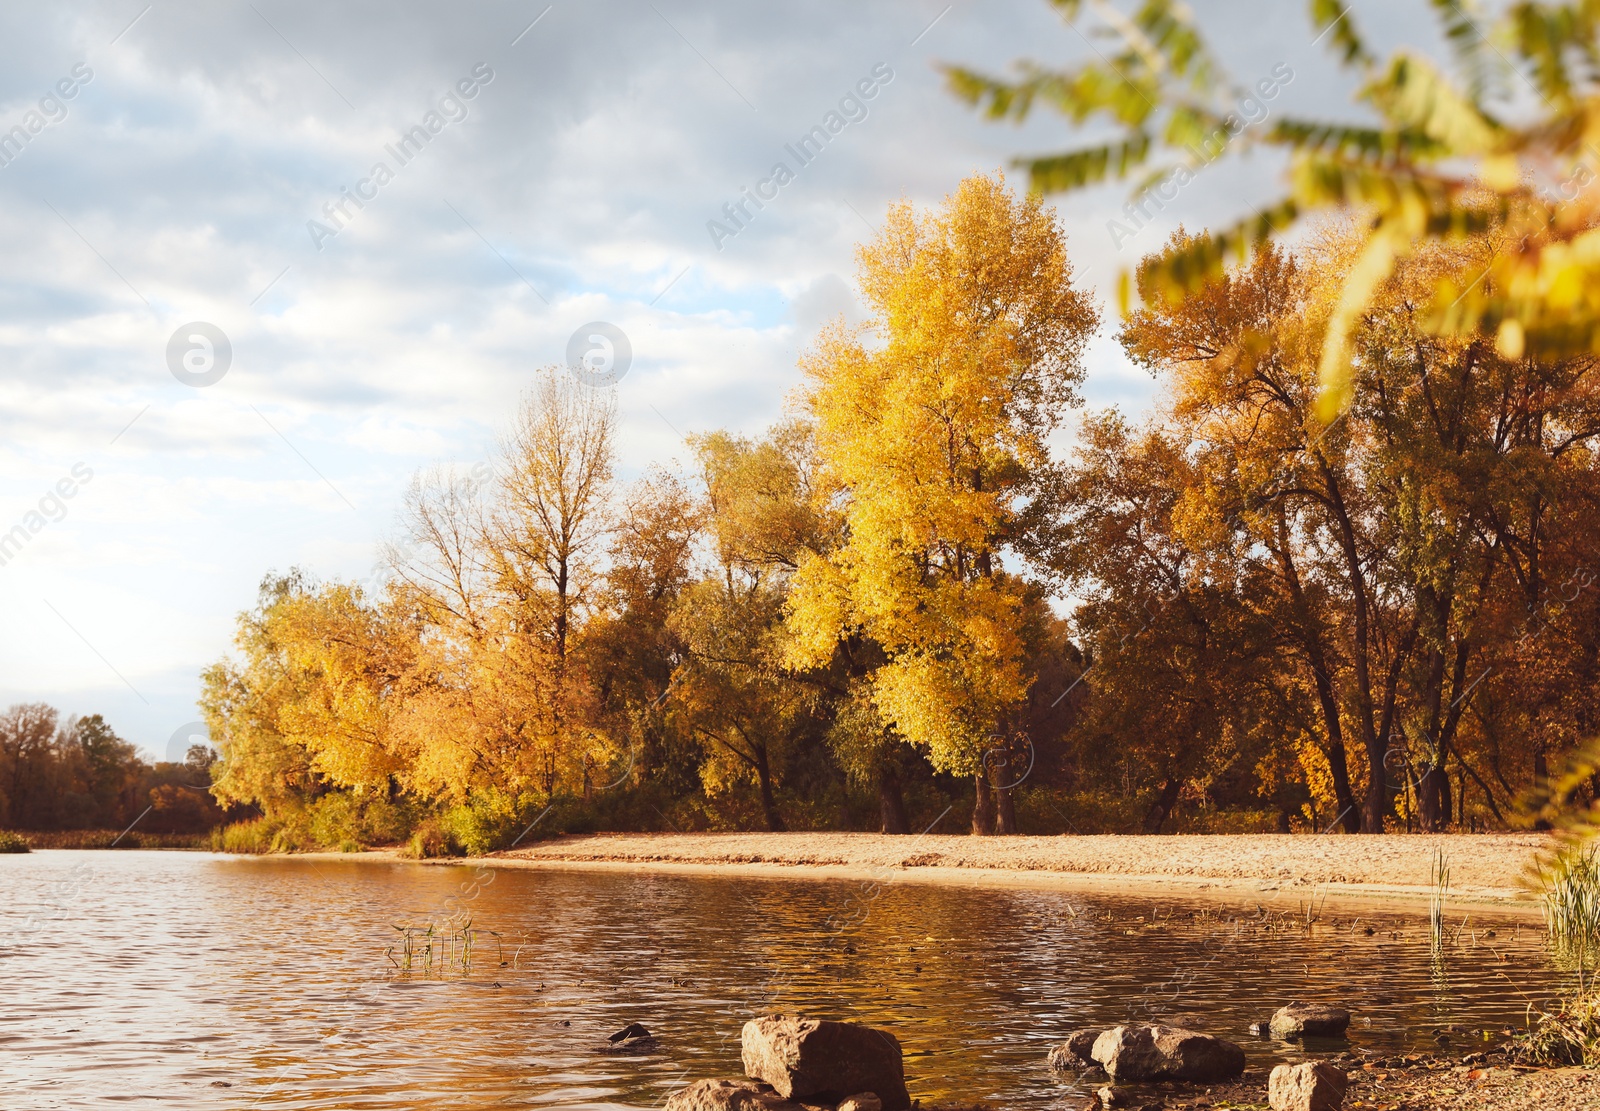 Photo of Picturesque view of river and trees with bright leaves. Autumn season